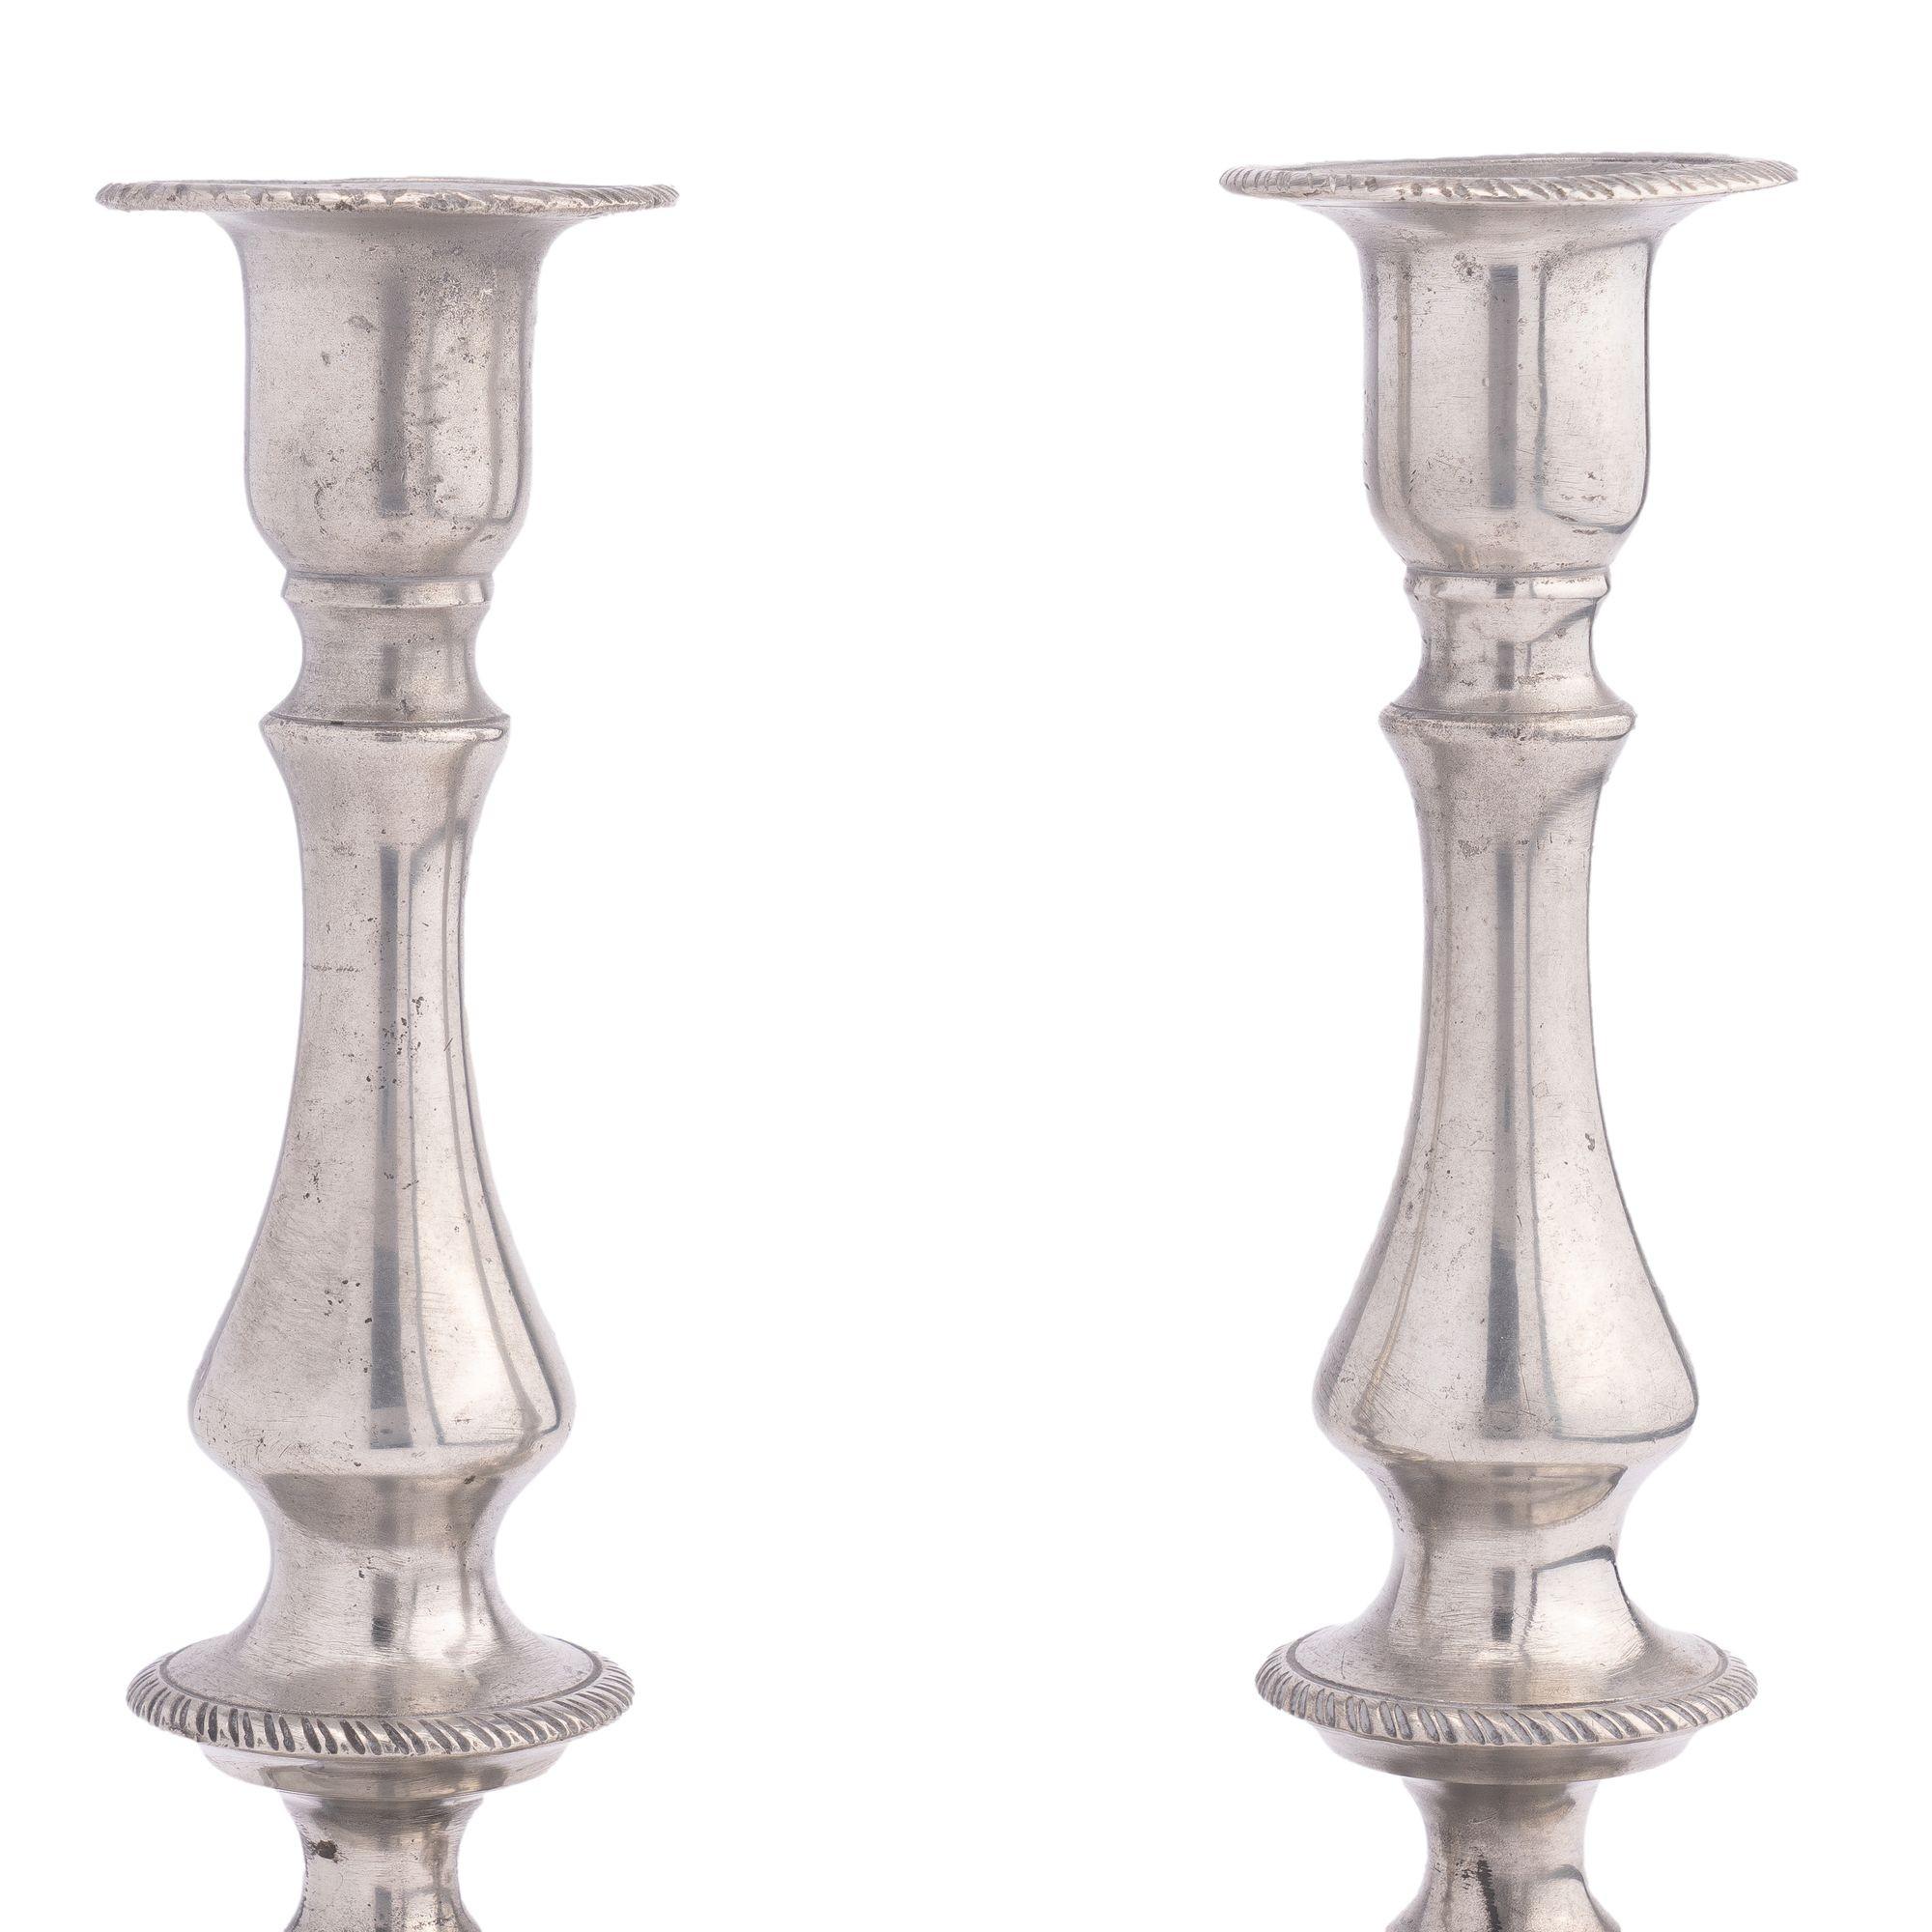 19th Century Pair of American Pewter Candlesticks, 1825-1835